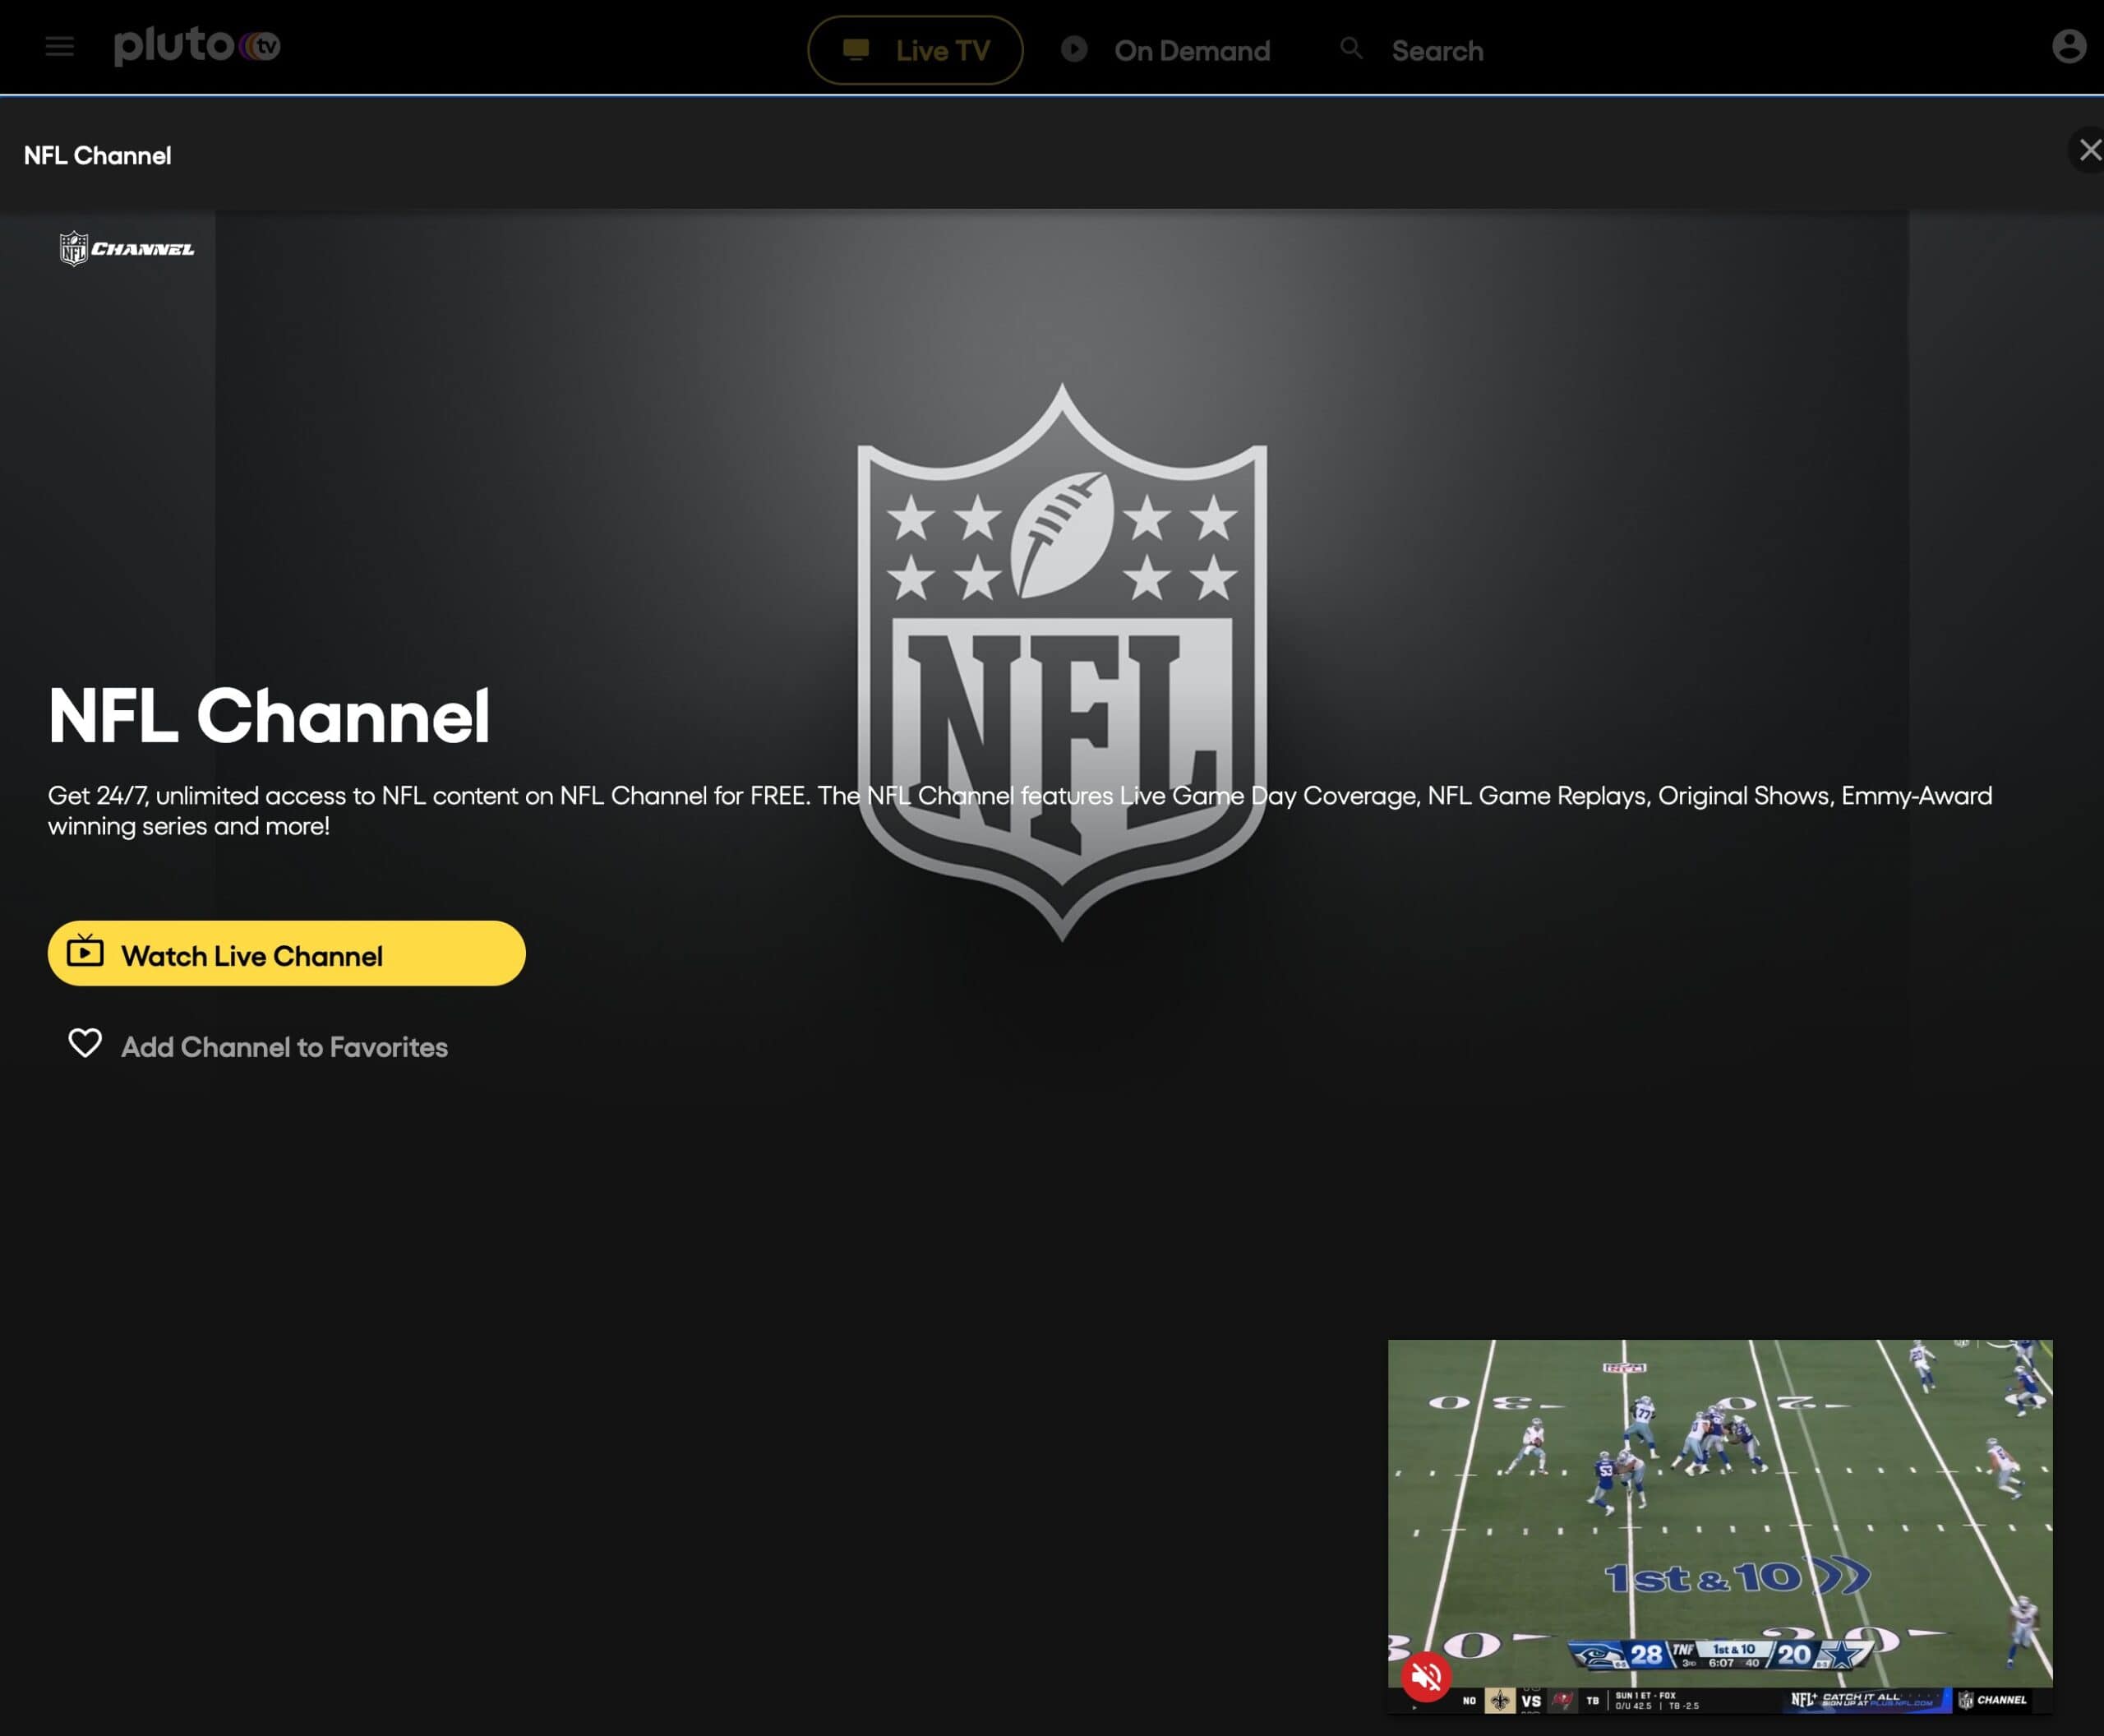 NFL Channel Pluto